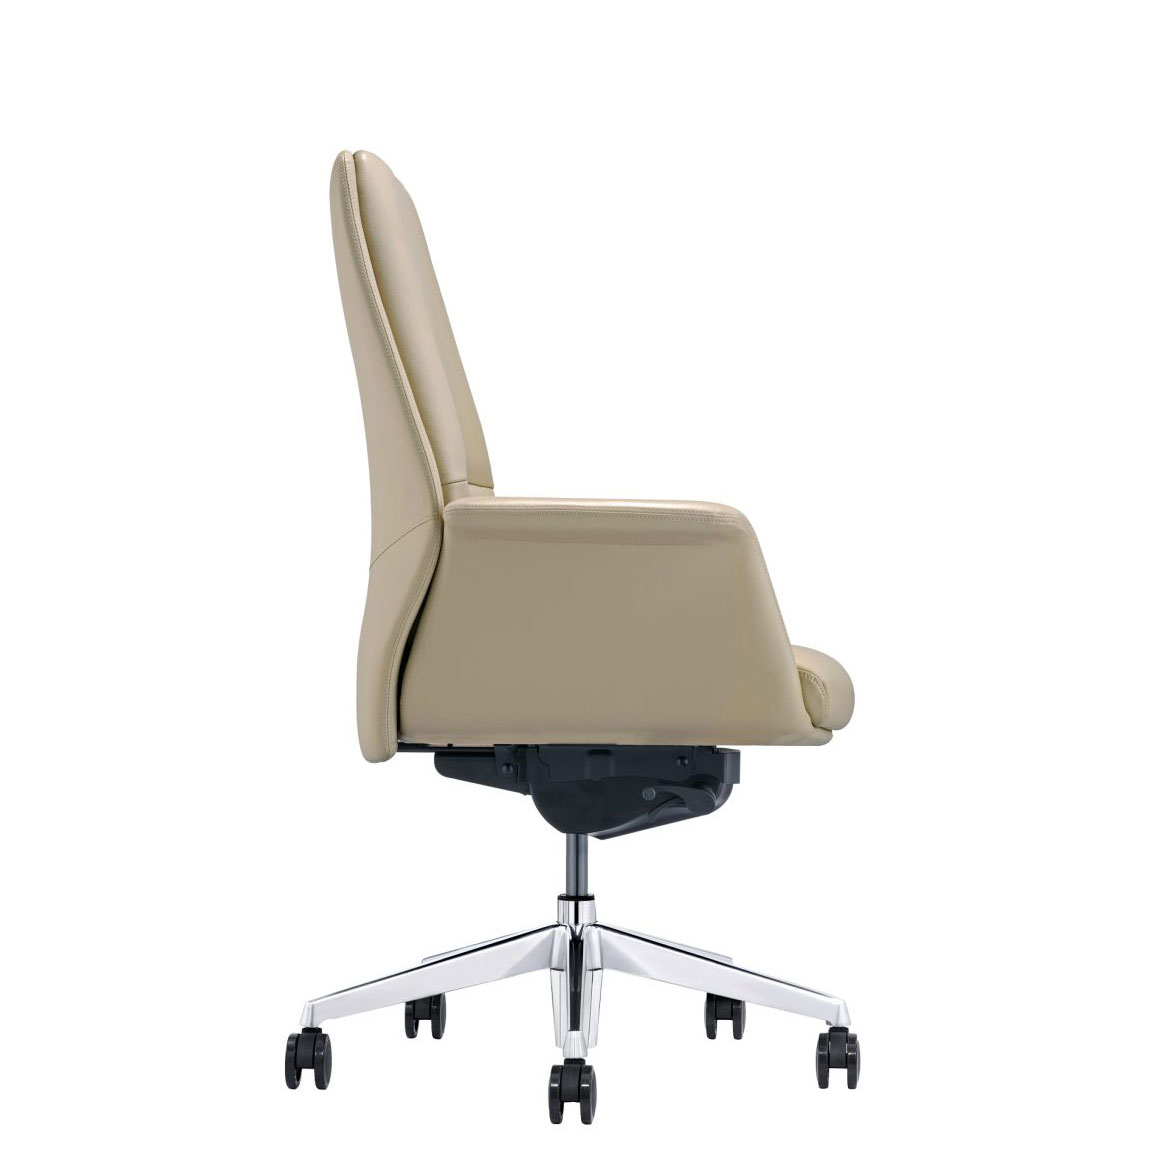 LOD85 Almond Leather Chair, SIde View